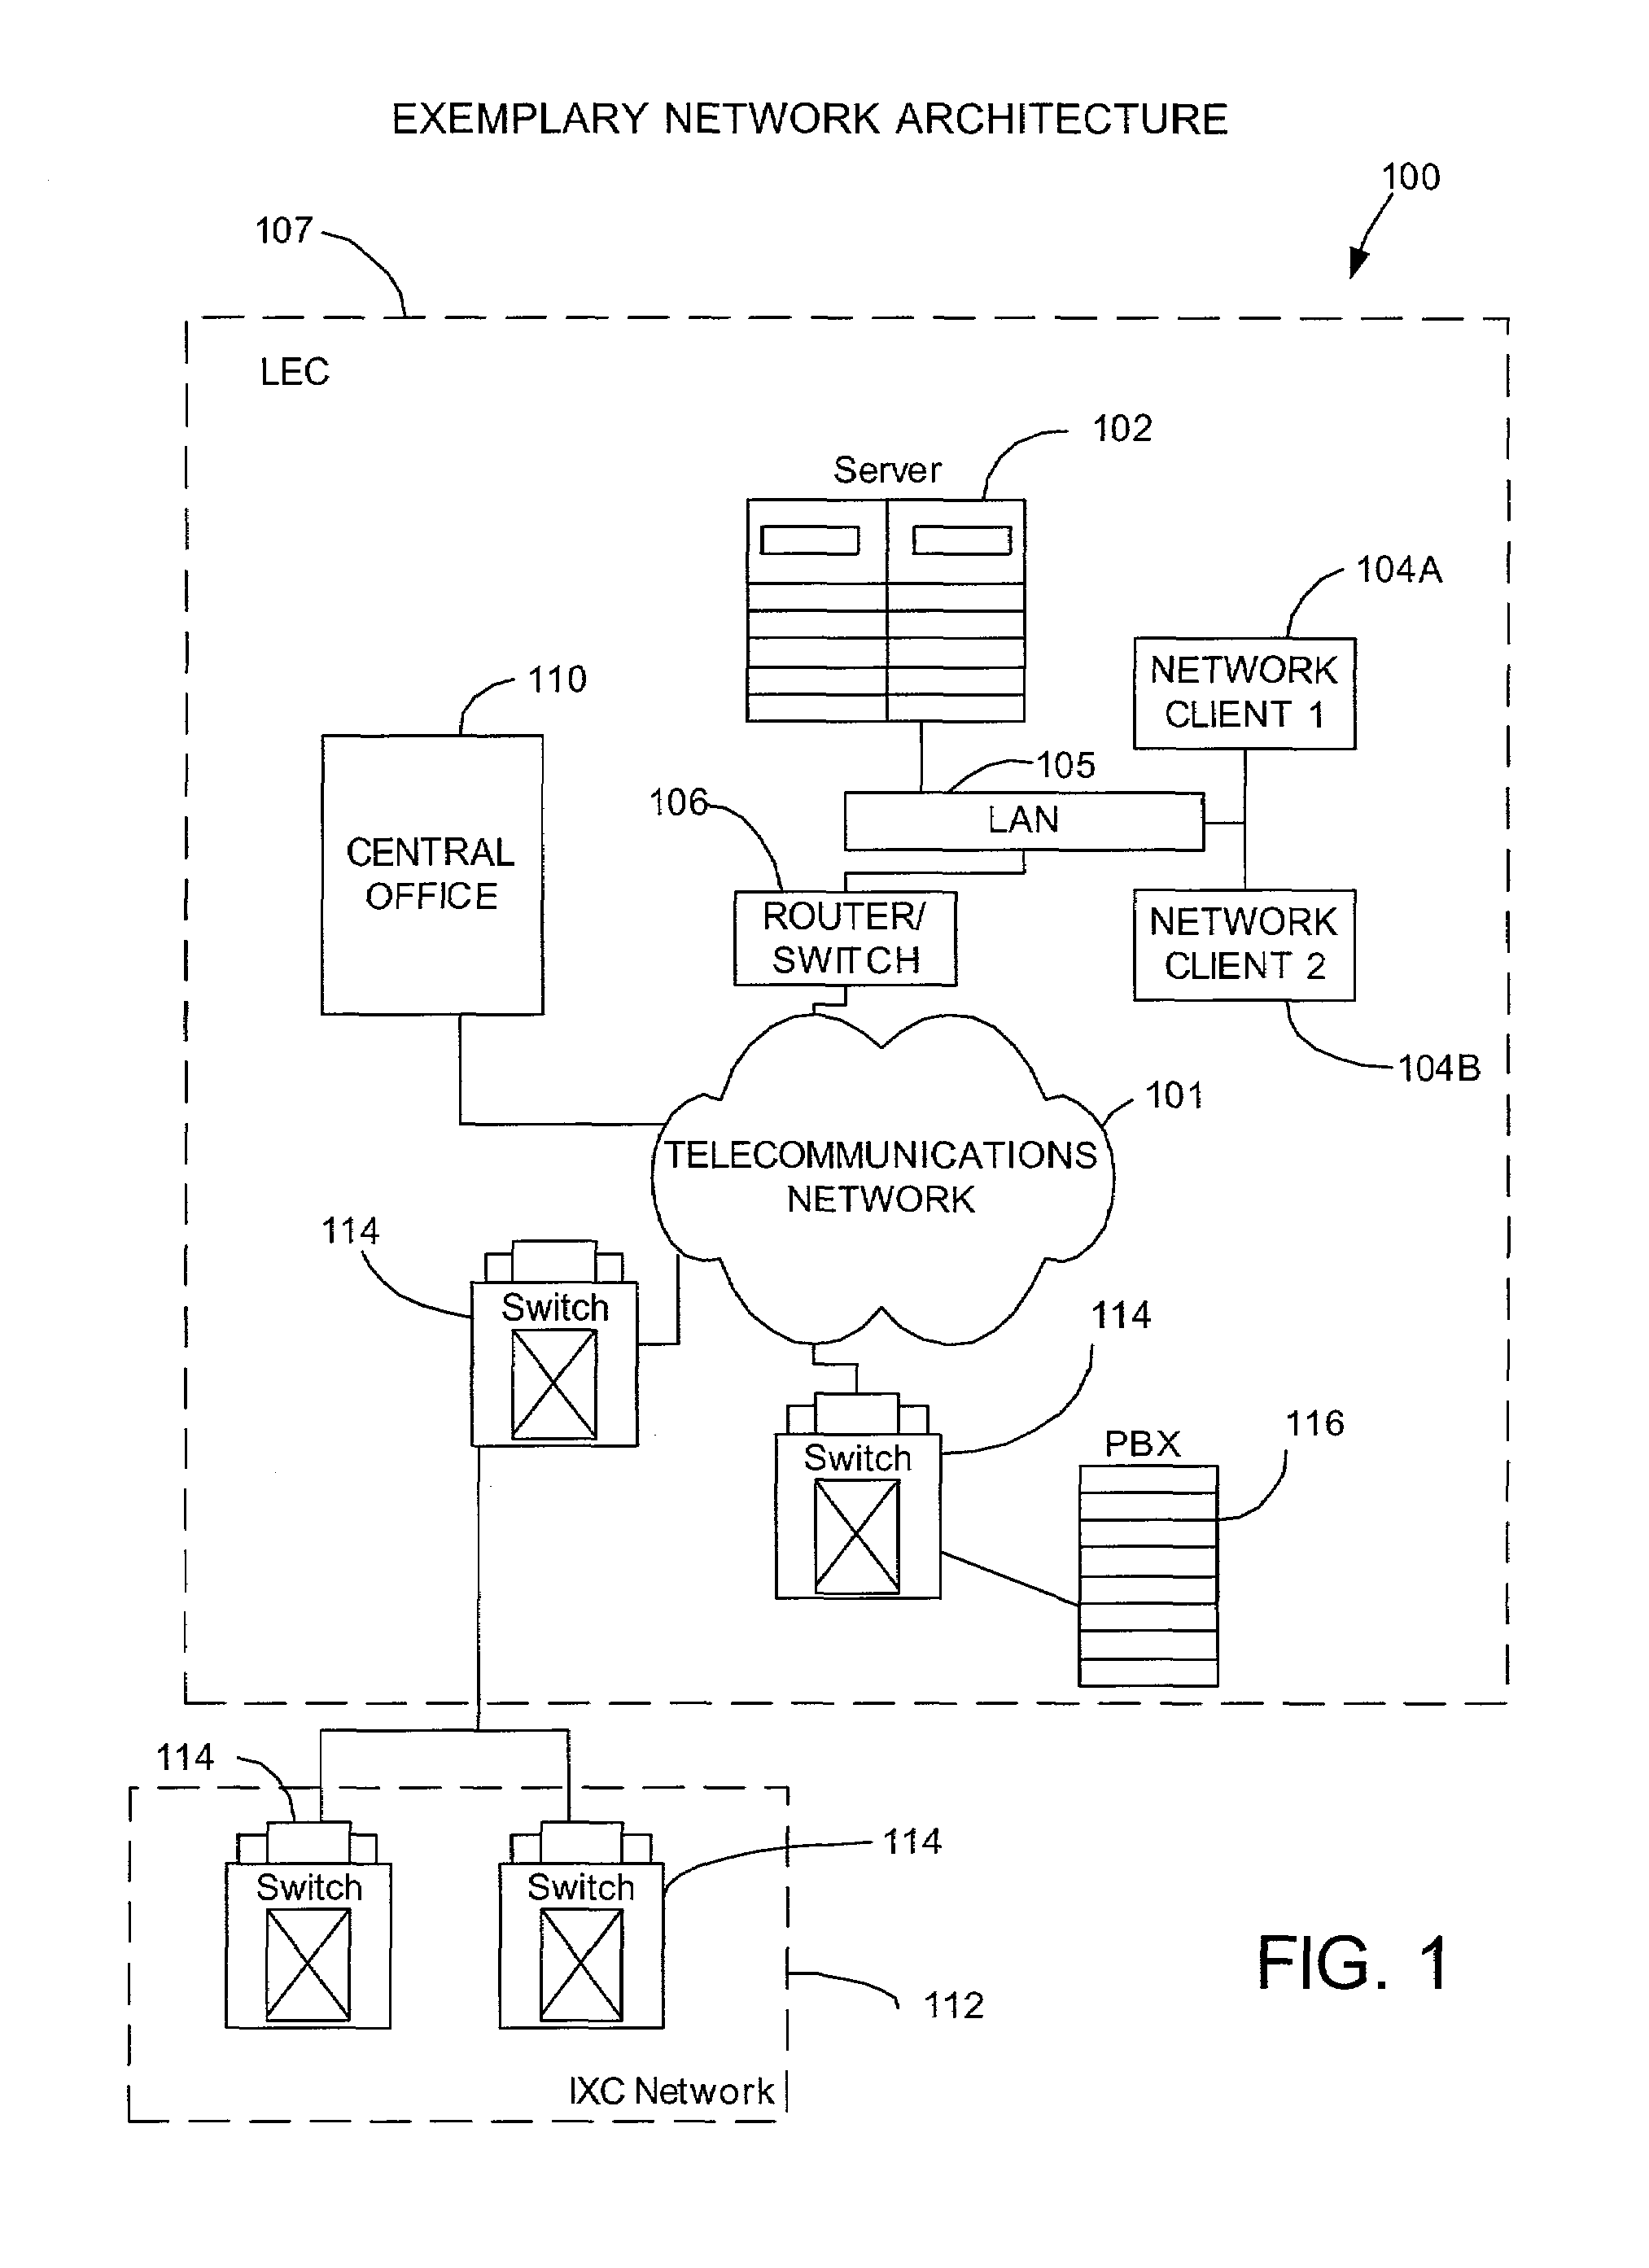 Method and system for optimizing switch-transaction processing in a telecommunications network